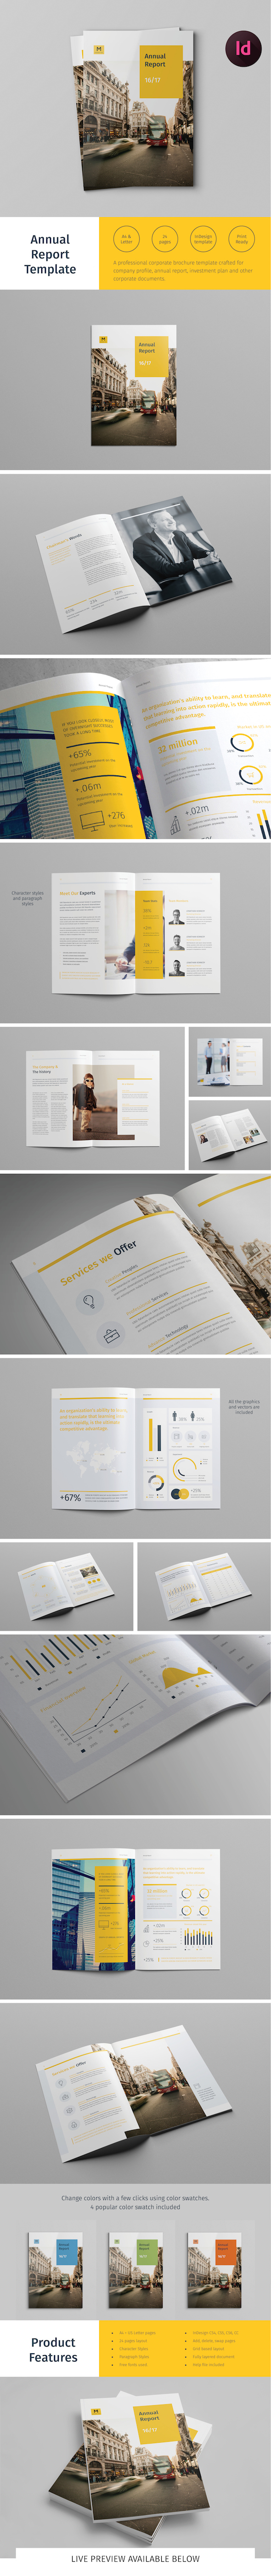 ANNUAL annual report brochure corporate template business Plan Layout infographics report company profile Corporate Brochure